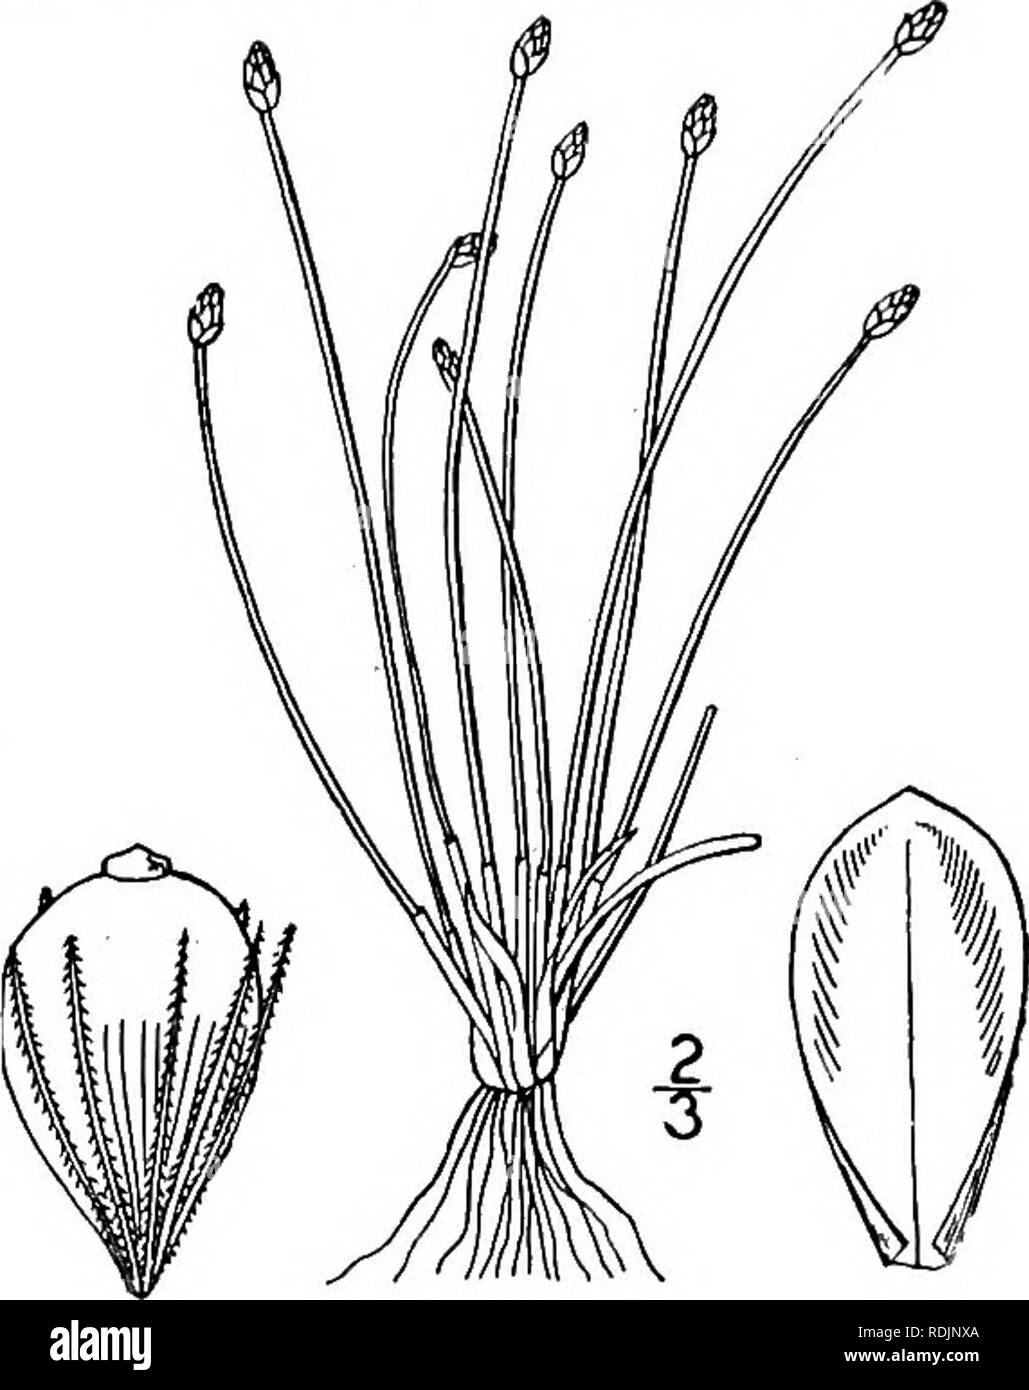 . An illustrated flora of the northern United States, Canada and the British possessions, from Newfoundland to the parallel of the southern boundary of Virginia, and from the Atlantic Ocean westward to the 102d meridian. Botany; Botany. Genus 3. SEDGE FAMILY. 3:3 7. Eleocharis capitata (L.) R. Br. Capitate Spike-rush. Fig. 764.. Scirpus capitatus L. Sp. PI. 48. 1753. Eleocharis capitata R.Br. Prodr. Fl. Nov. Holl. 1 : 225. 1810. Eleocharis dispar E. J. Hill, Bot. Gaz. 7: 3. 1882. E. capitata dispar Fernald, Rhodora 8: 129. 1906. Annual, roots fibrous, culms densely tufted, nearly- terete, almo Stock Photo